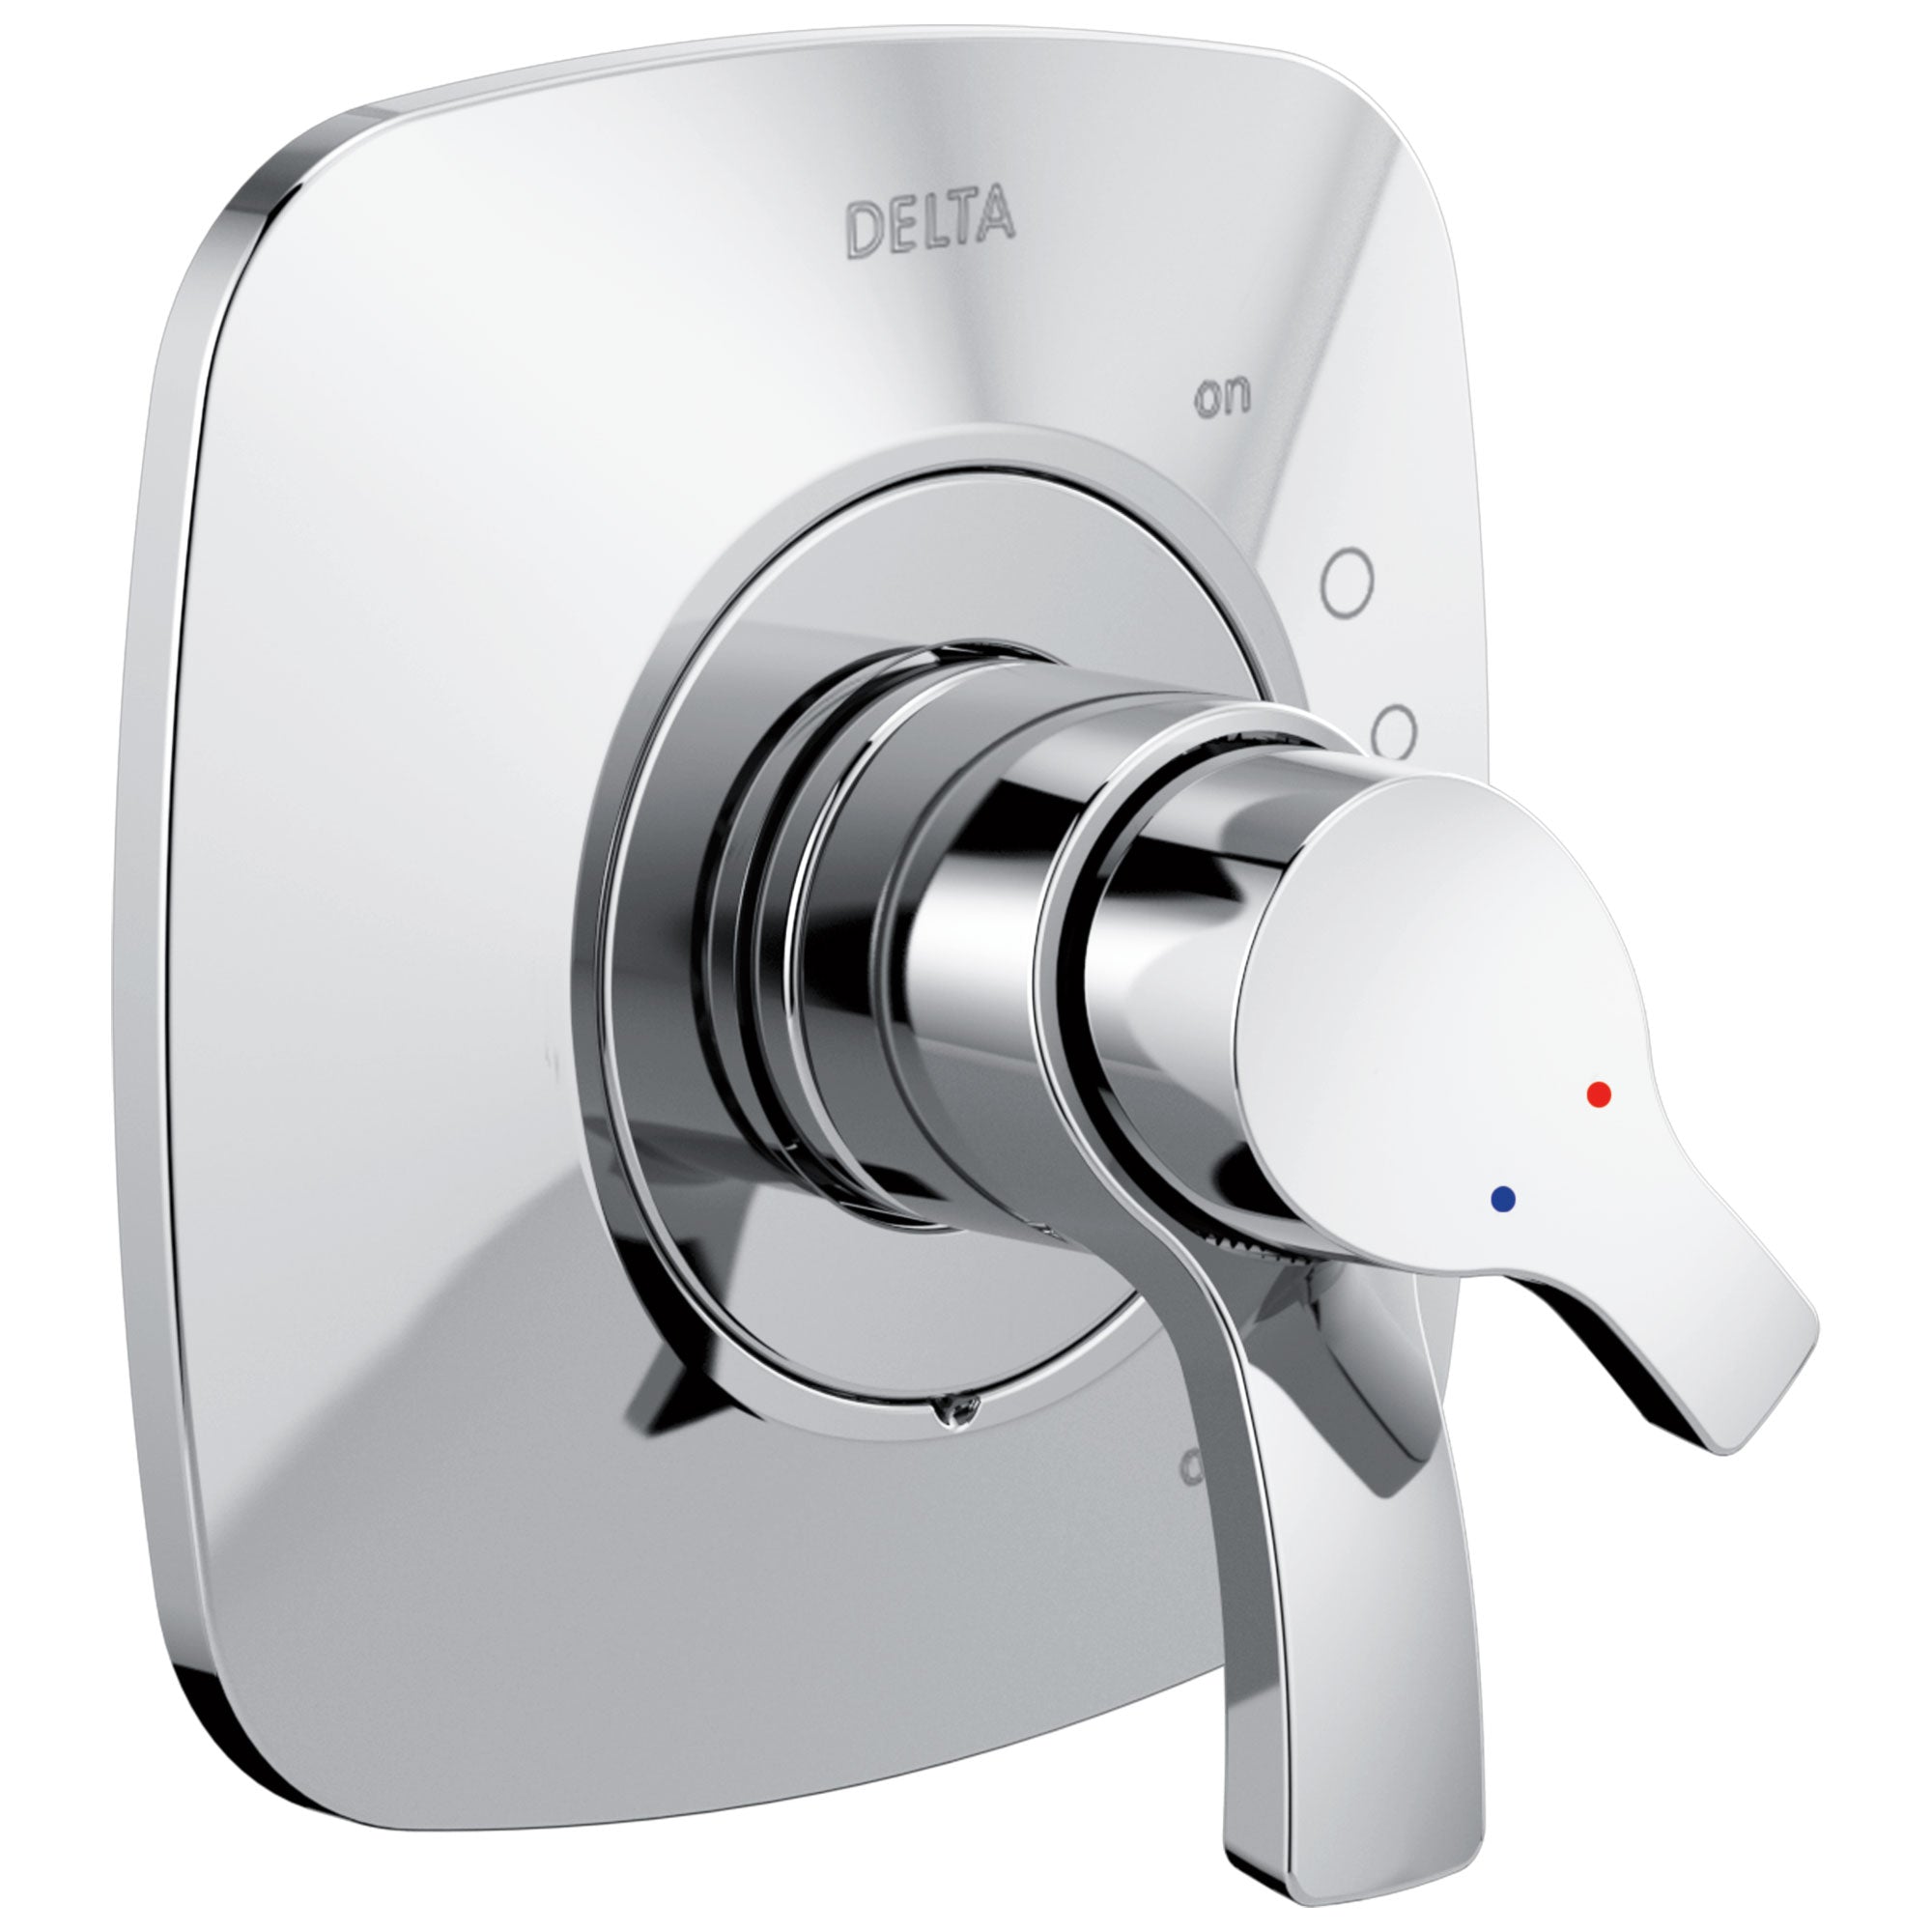 Delta Tesla Collection Chrome Monitor 17 Dual Temperature and Water Pressure Shower Faucet Control Handle Trim Kit (Valve Sold Separately) 732790